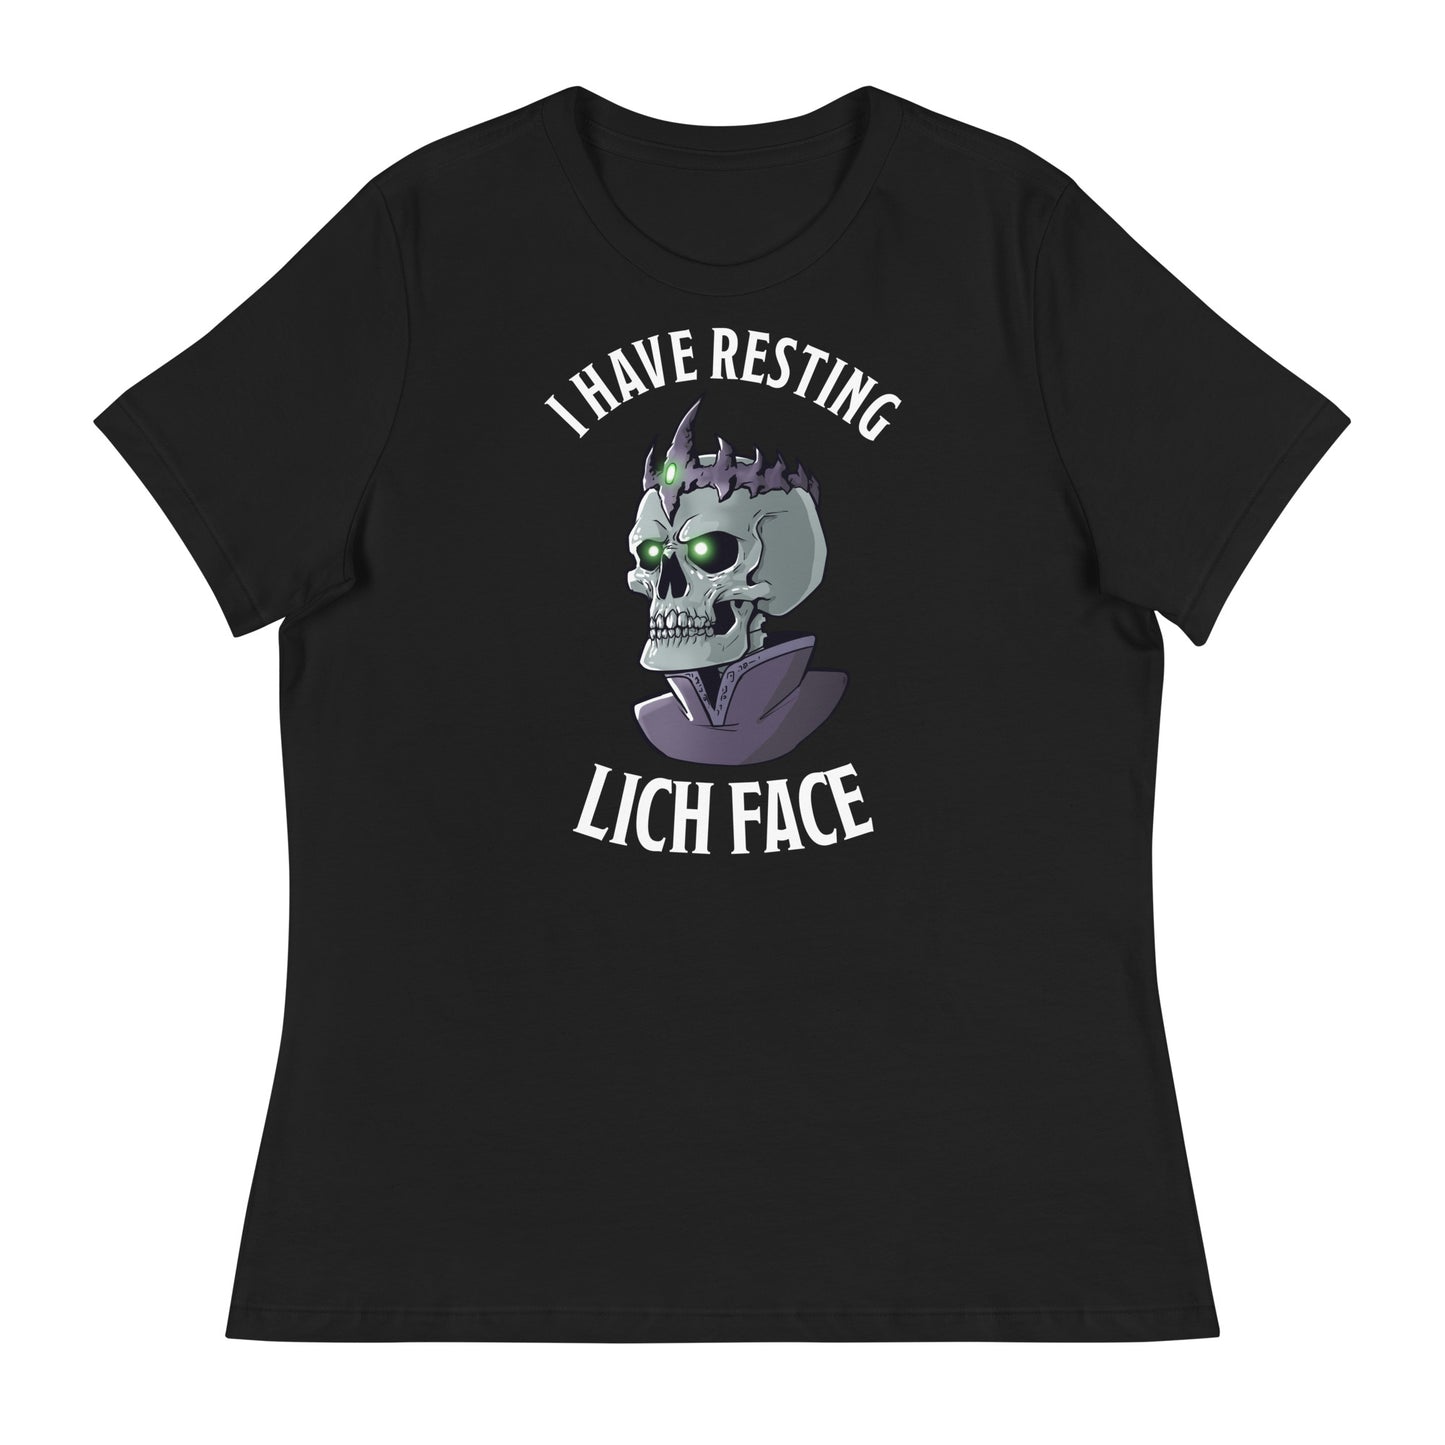 Resting Lich Face Women's Relaxed T-Shirt  Level 1 Gamers Black S 